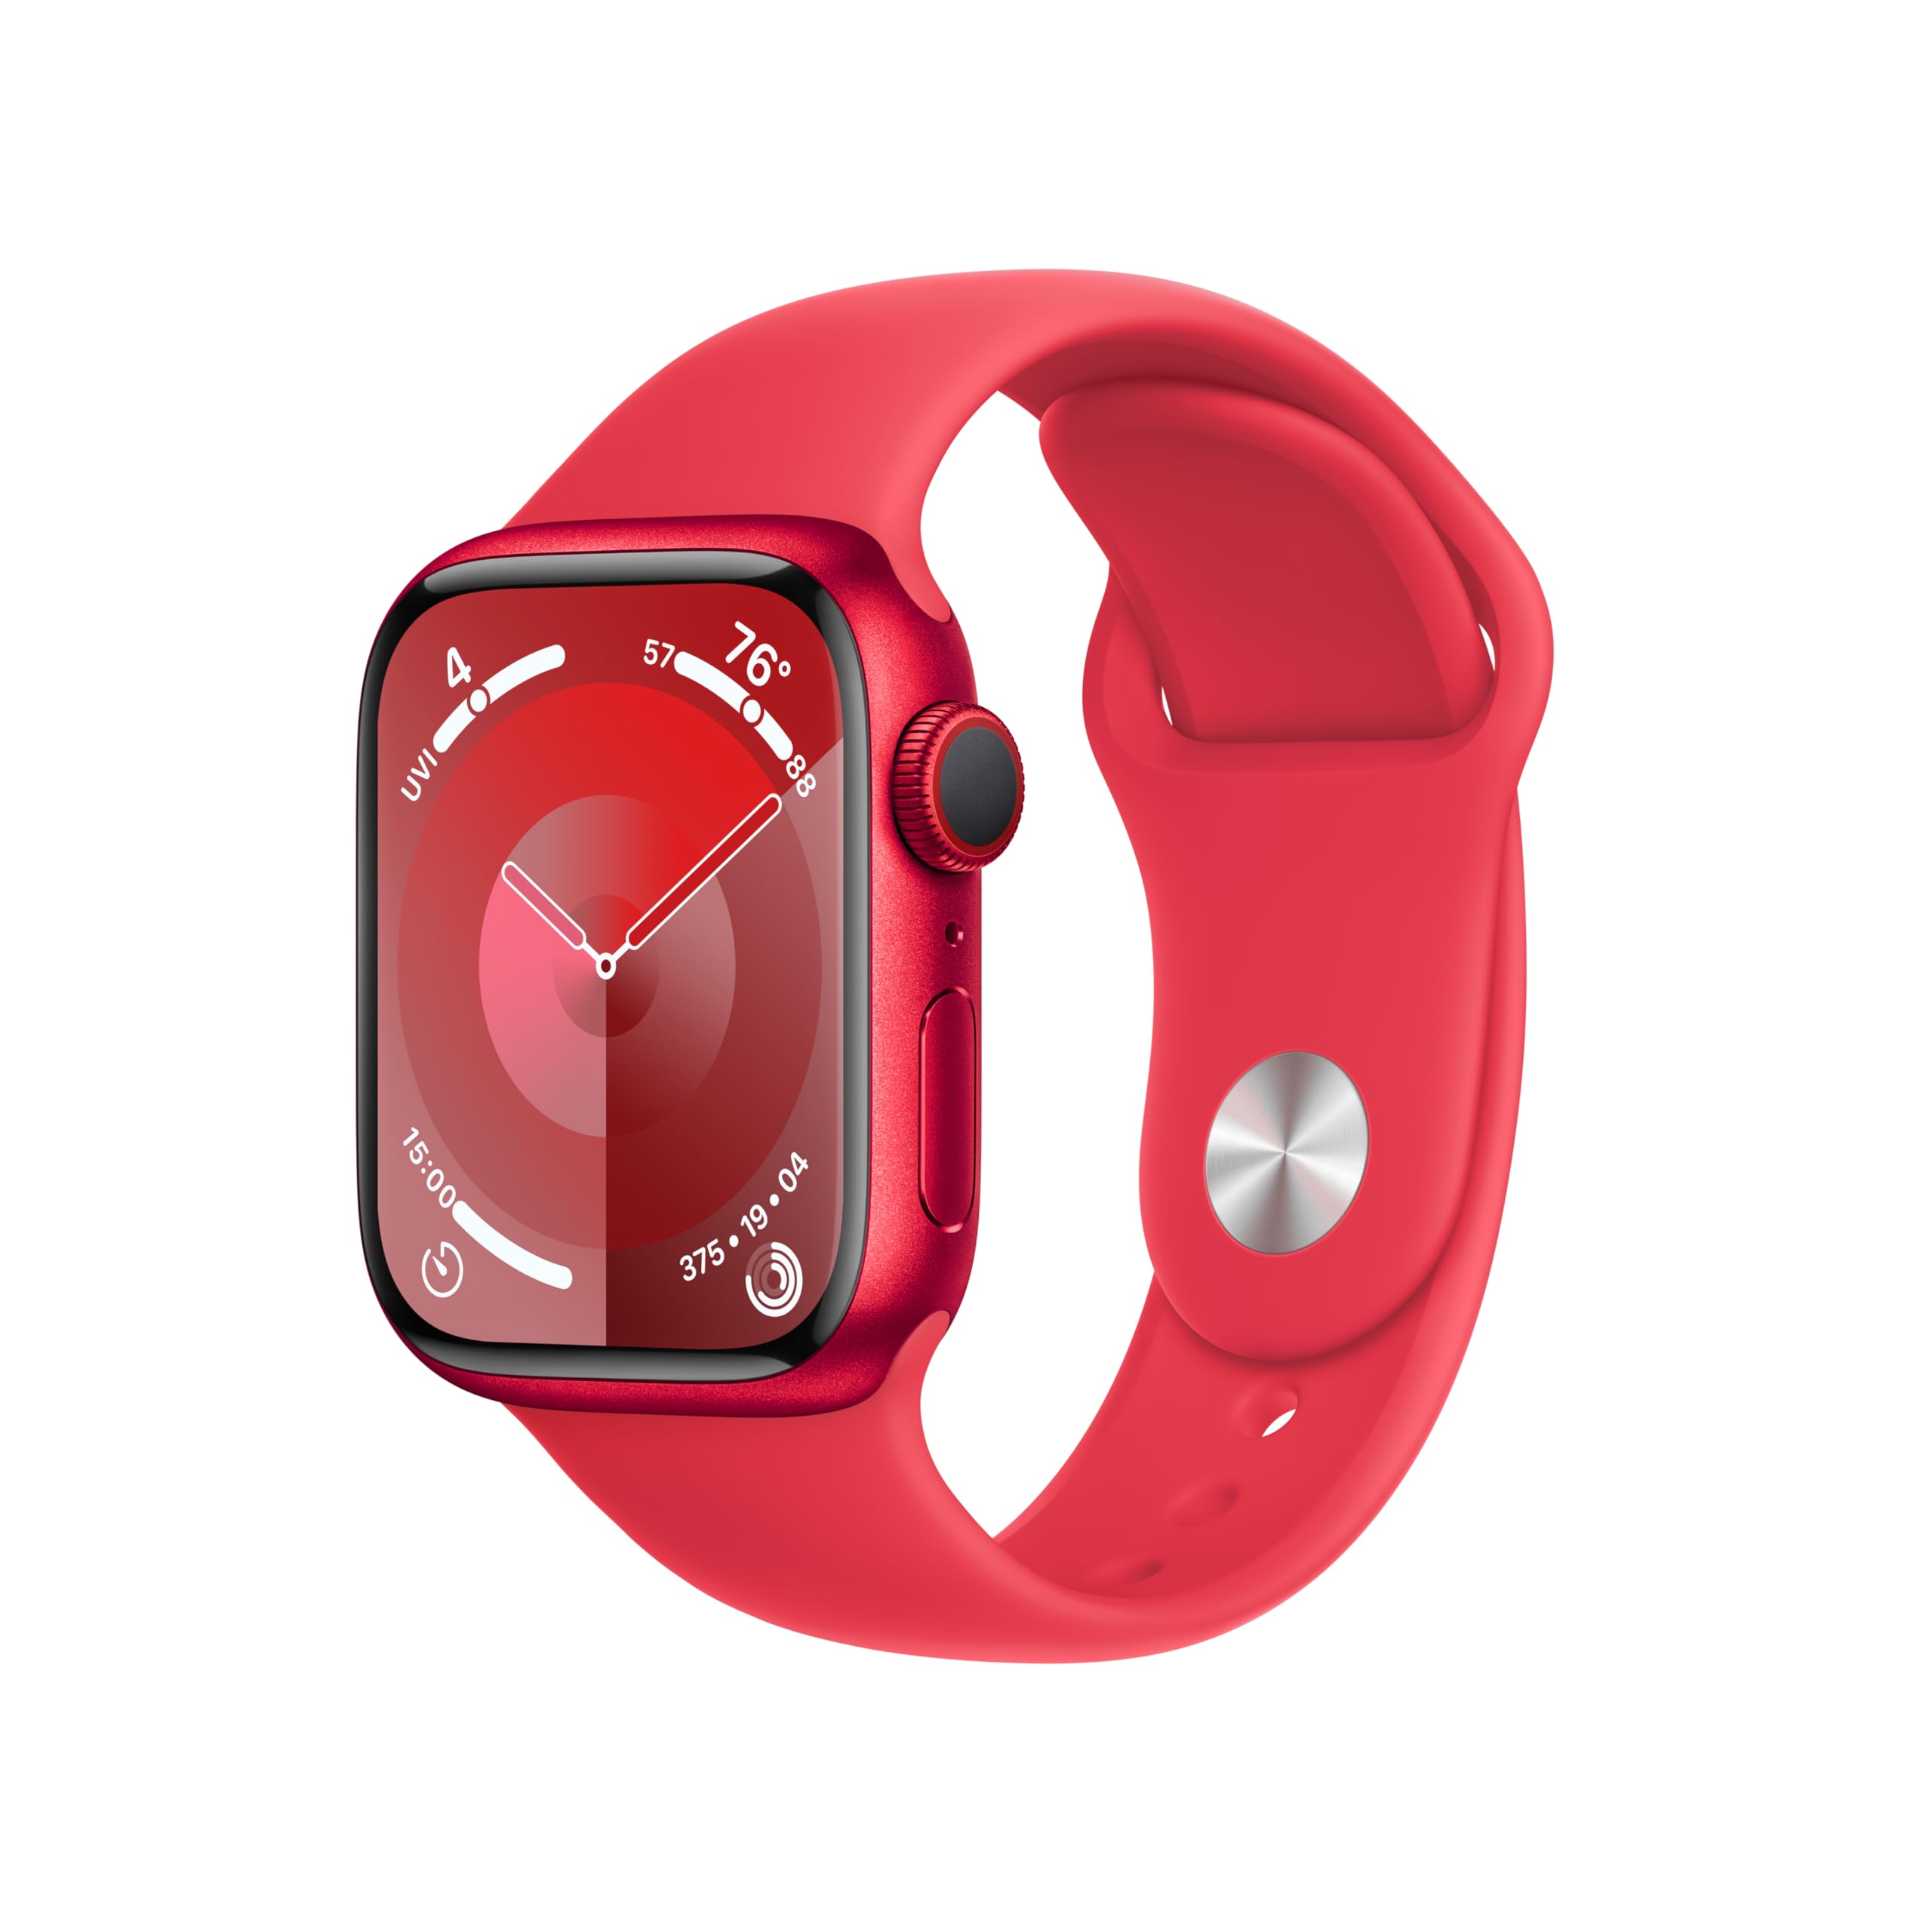 41mm Apple Watch Series 9 GPS & Cellular Aluminum Case Smartwatch w/ Sport Band (Red)  $294.60 + Free Shipping